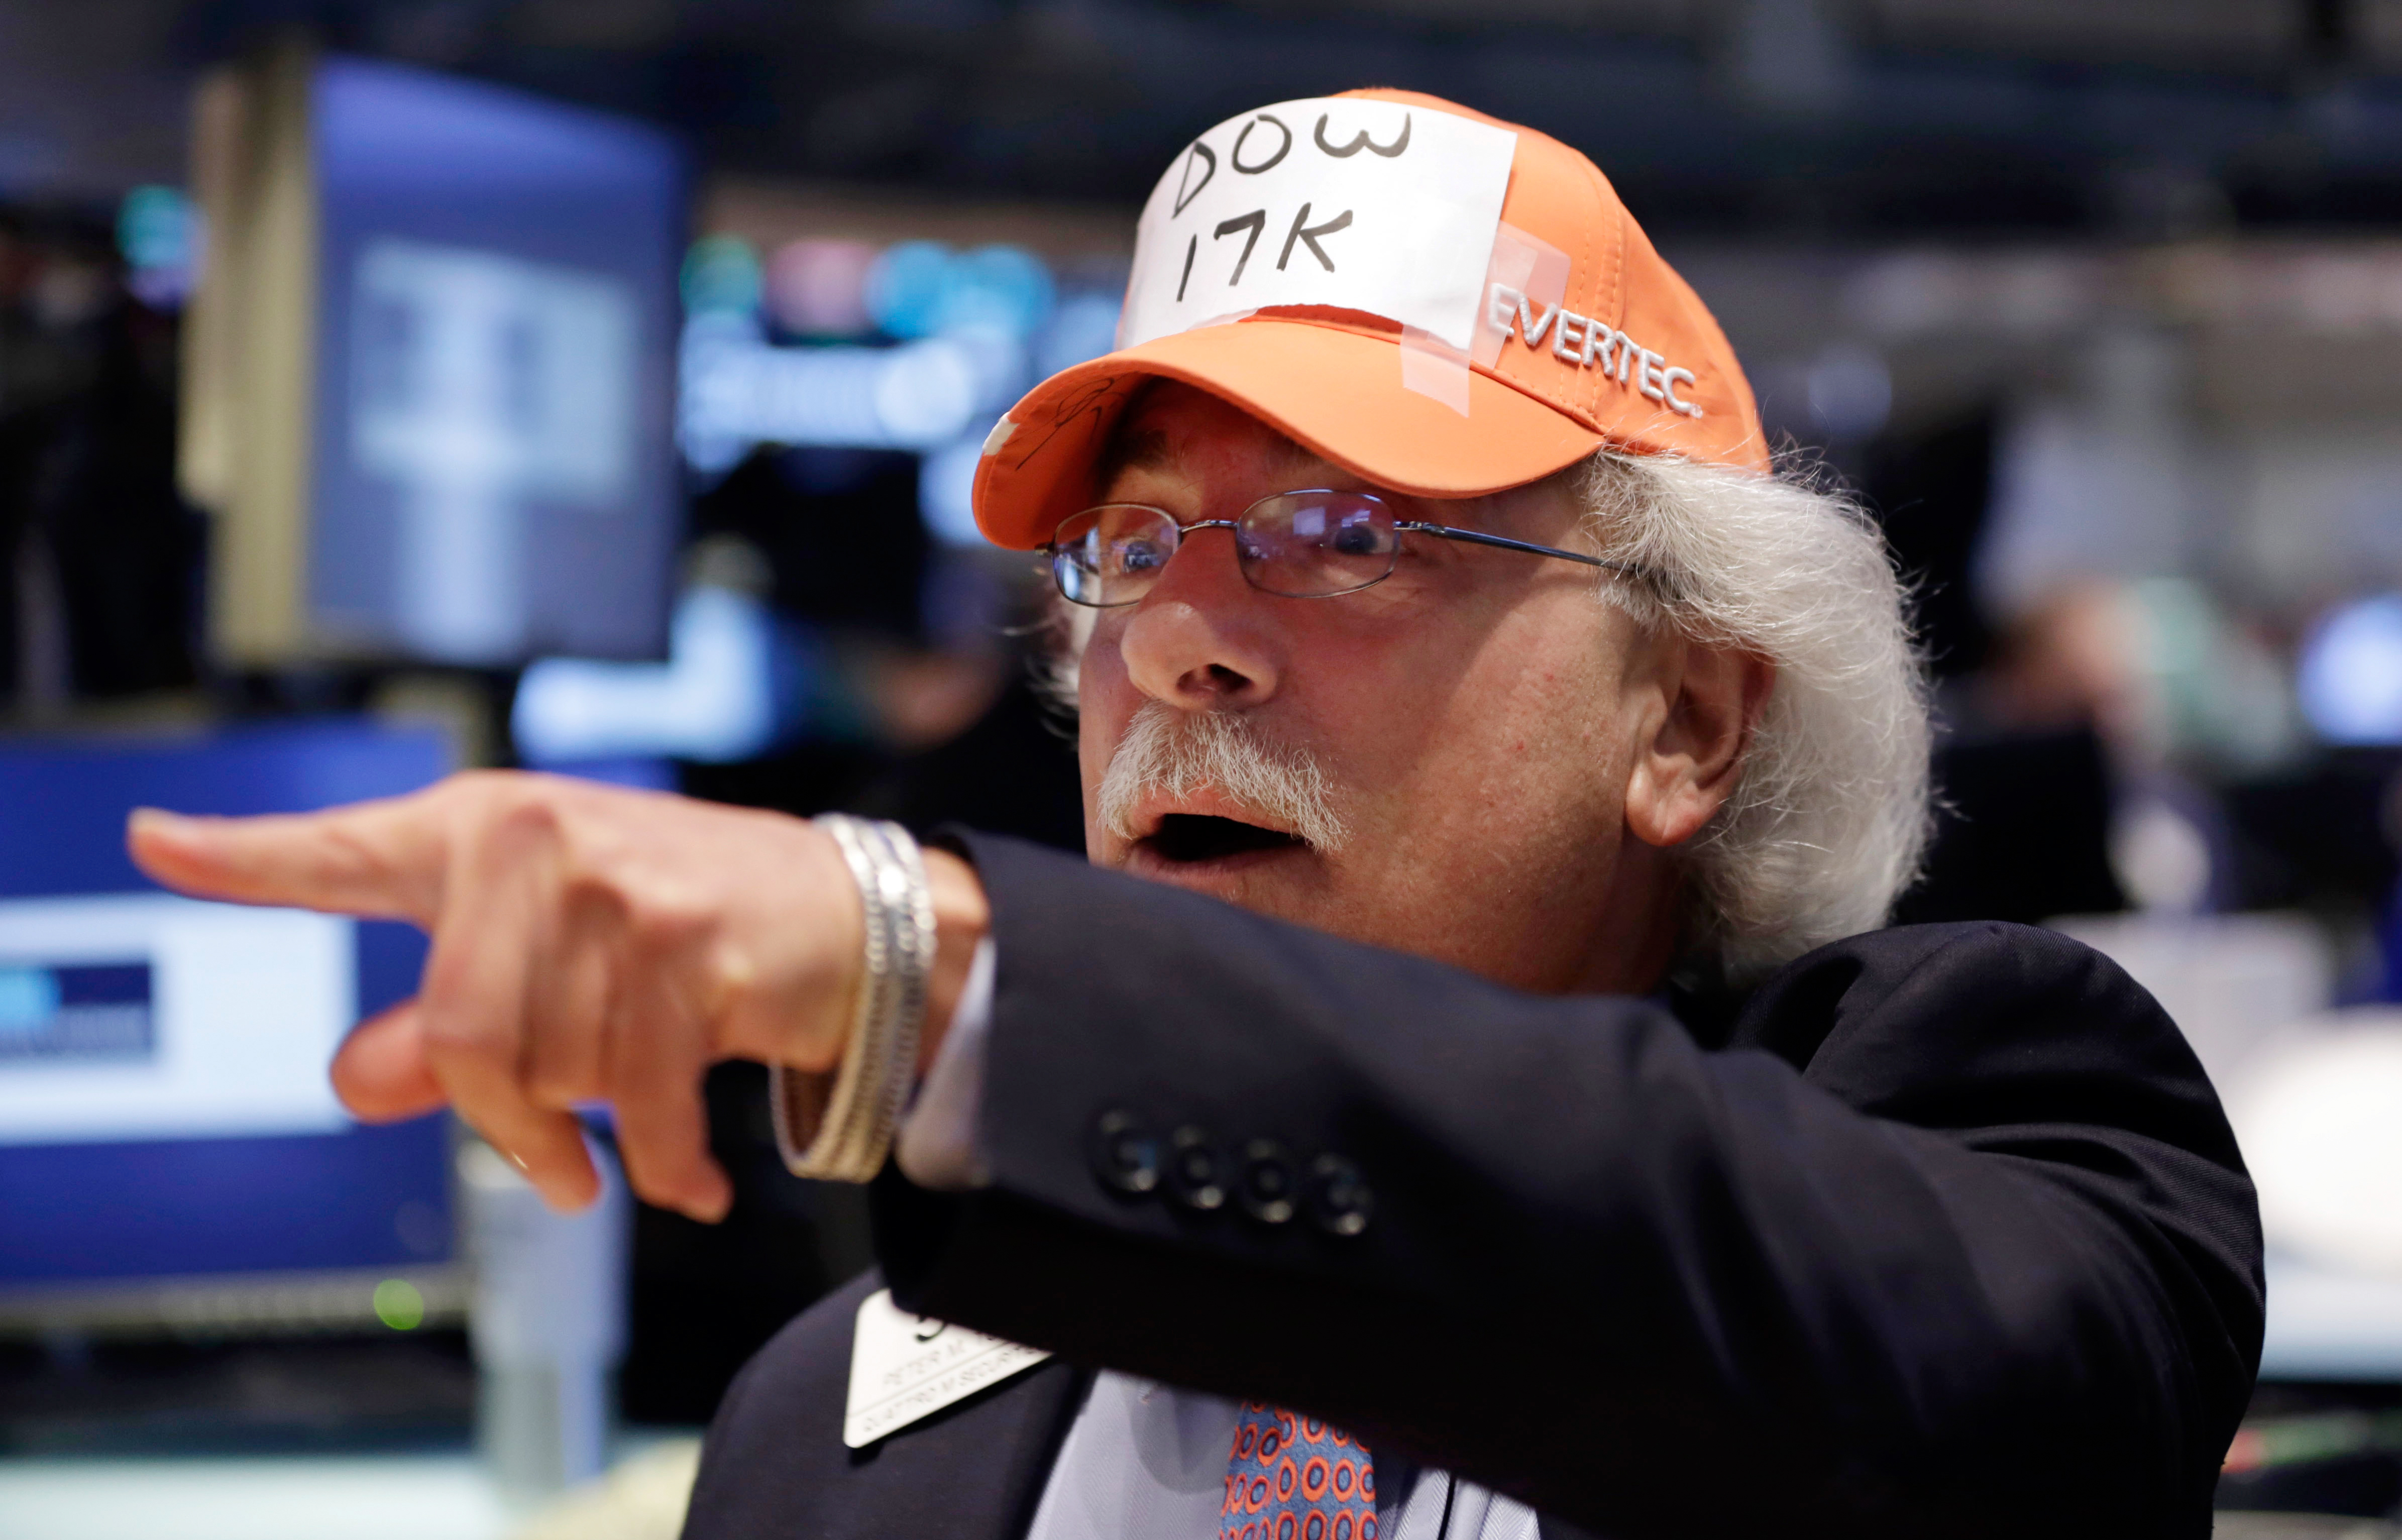 3 Reasons to Care That the Dow Just Hit 17,000